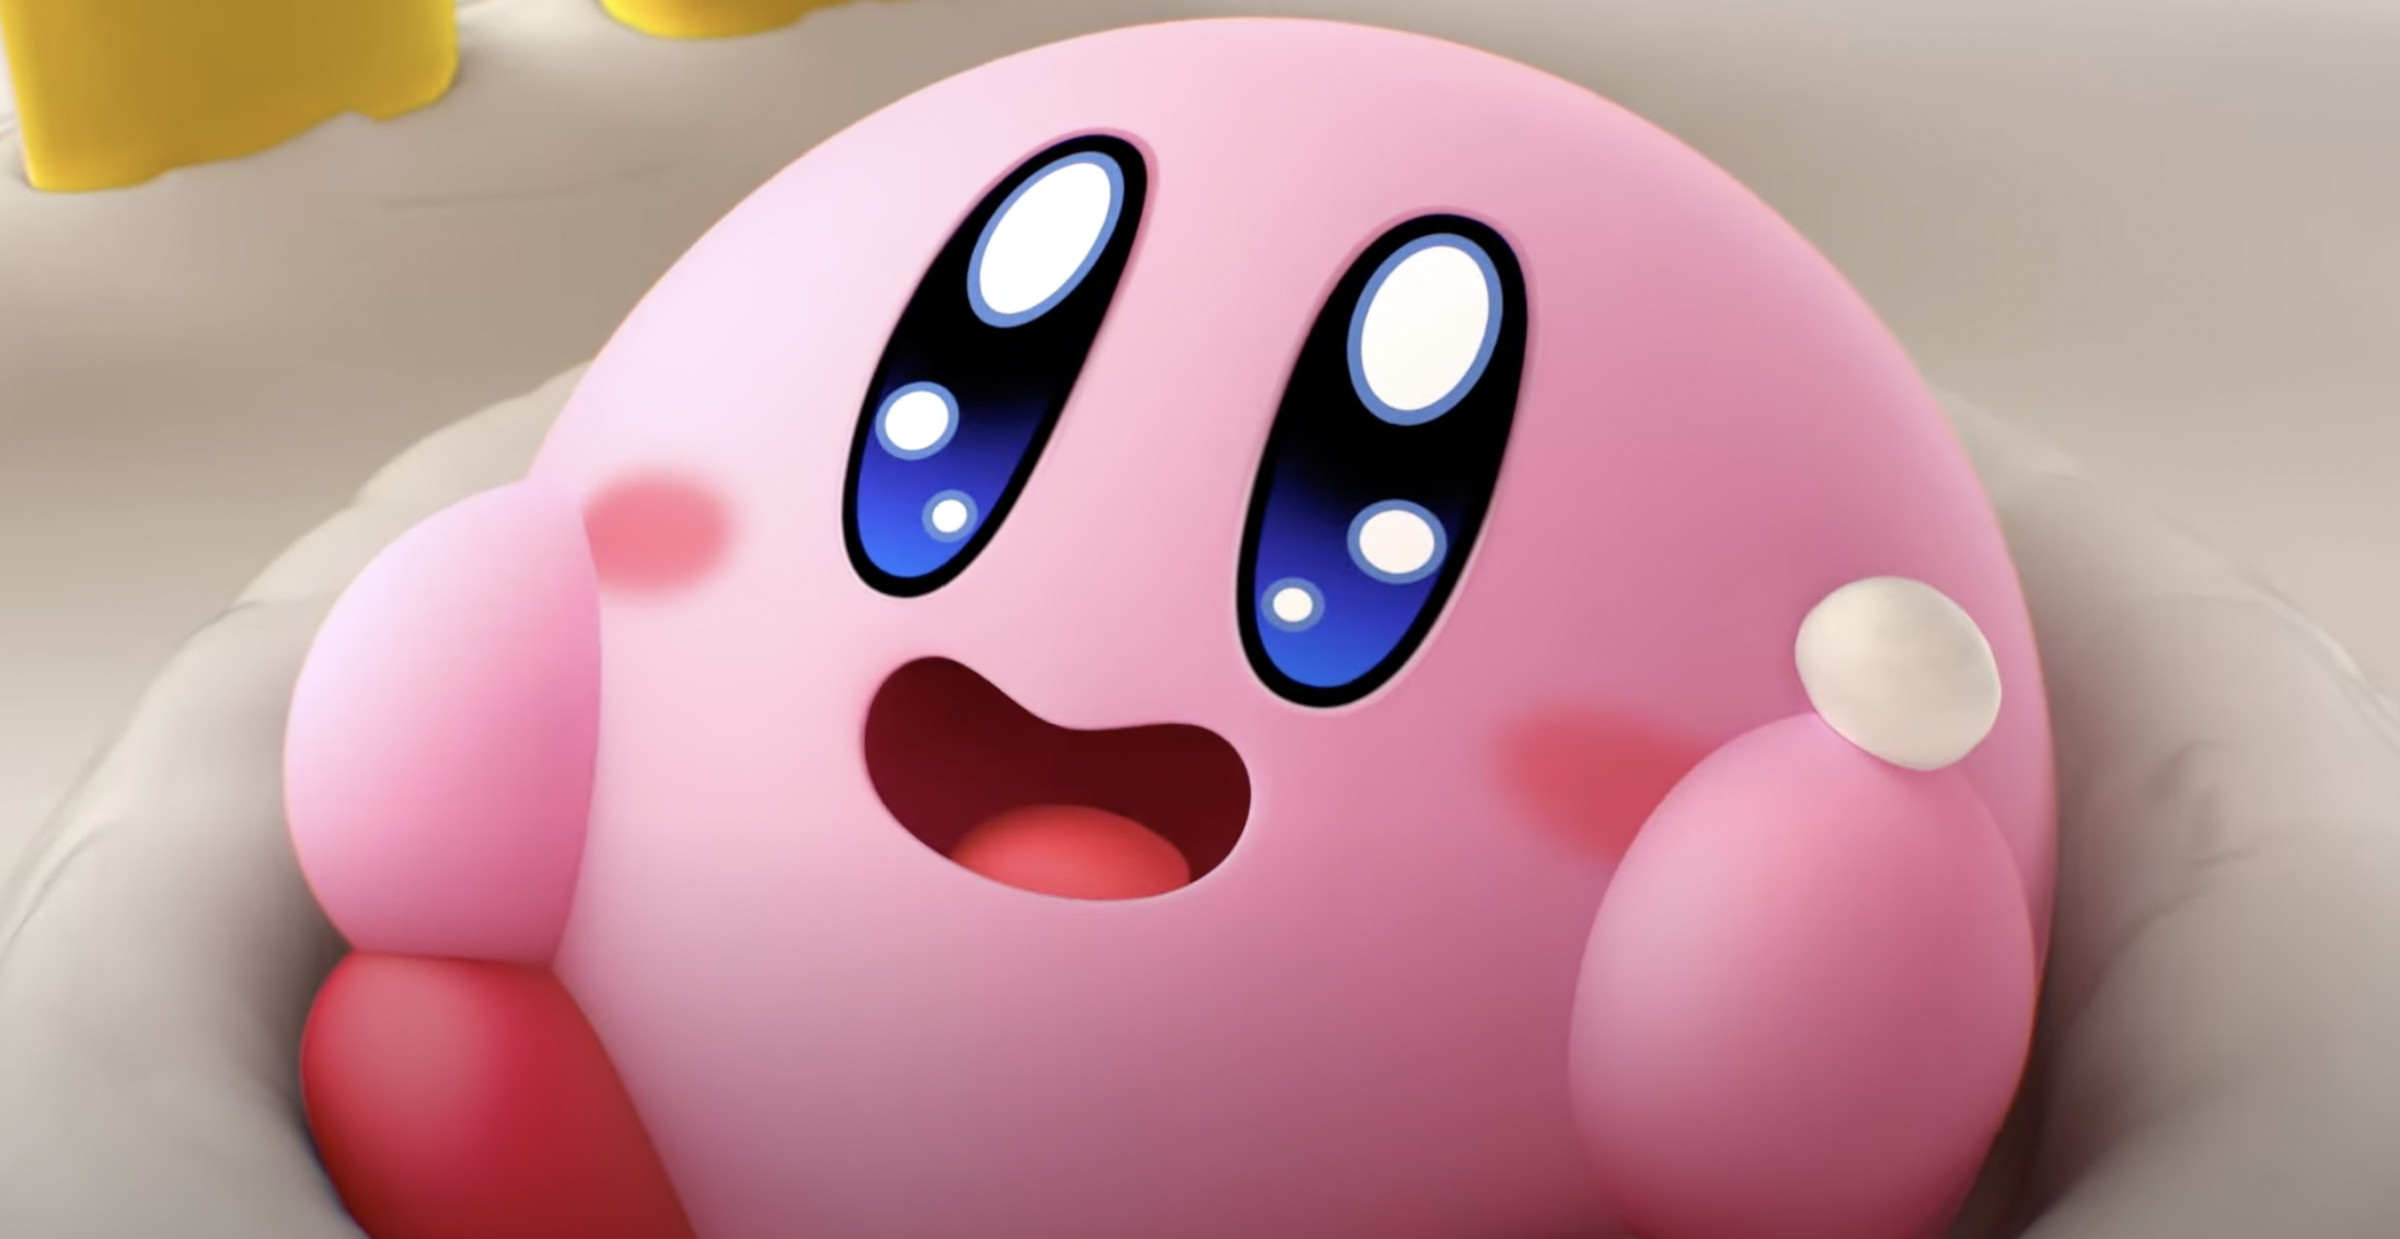 Screenshot from Kirby’s Dream Buffet in which a pink circular blob like creature with huge eyes no nose, rosy cheeks, and a wide open mouth, sits happily in a pile of cake frosting.